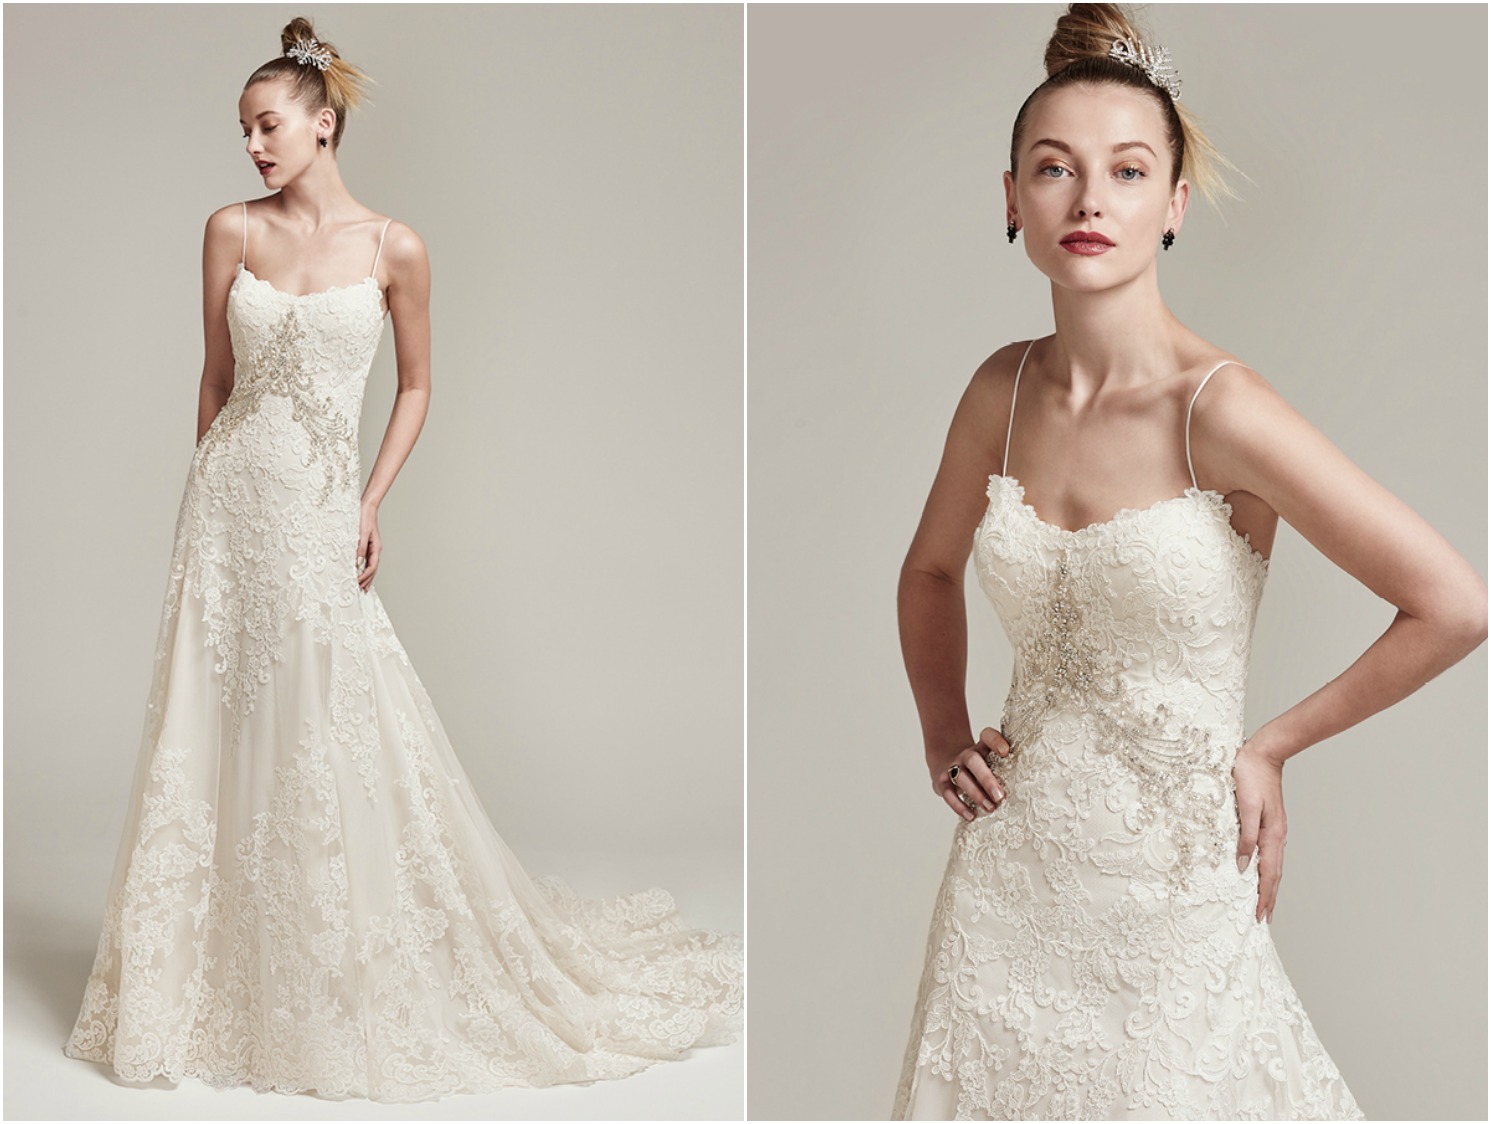 Flowing with rich texture and dimension, this tulle A-line wedding dress is accented by floral lace embroidery and Swarovski crystal details. Complete with soft scoop neckline, scalloped hemline, and delicate spaghetti straps. Finished with crystal buttons over zipper closure. 

<a href="https://www.maggiesottero.com/sottero-and-midgley/walker-rose/9889" target="_blank">Sottero &amp; Midgley</a>